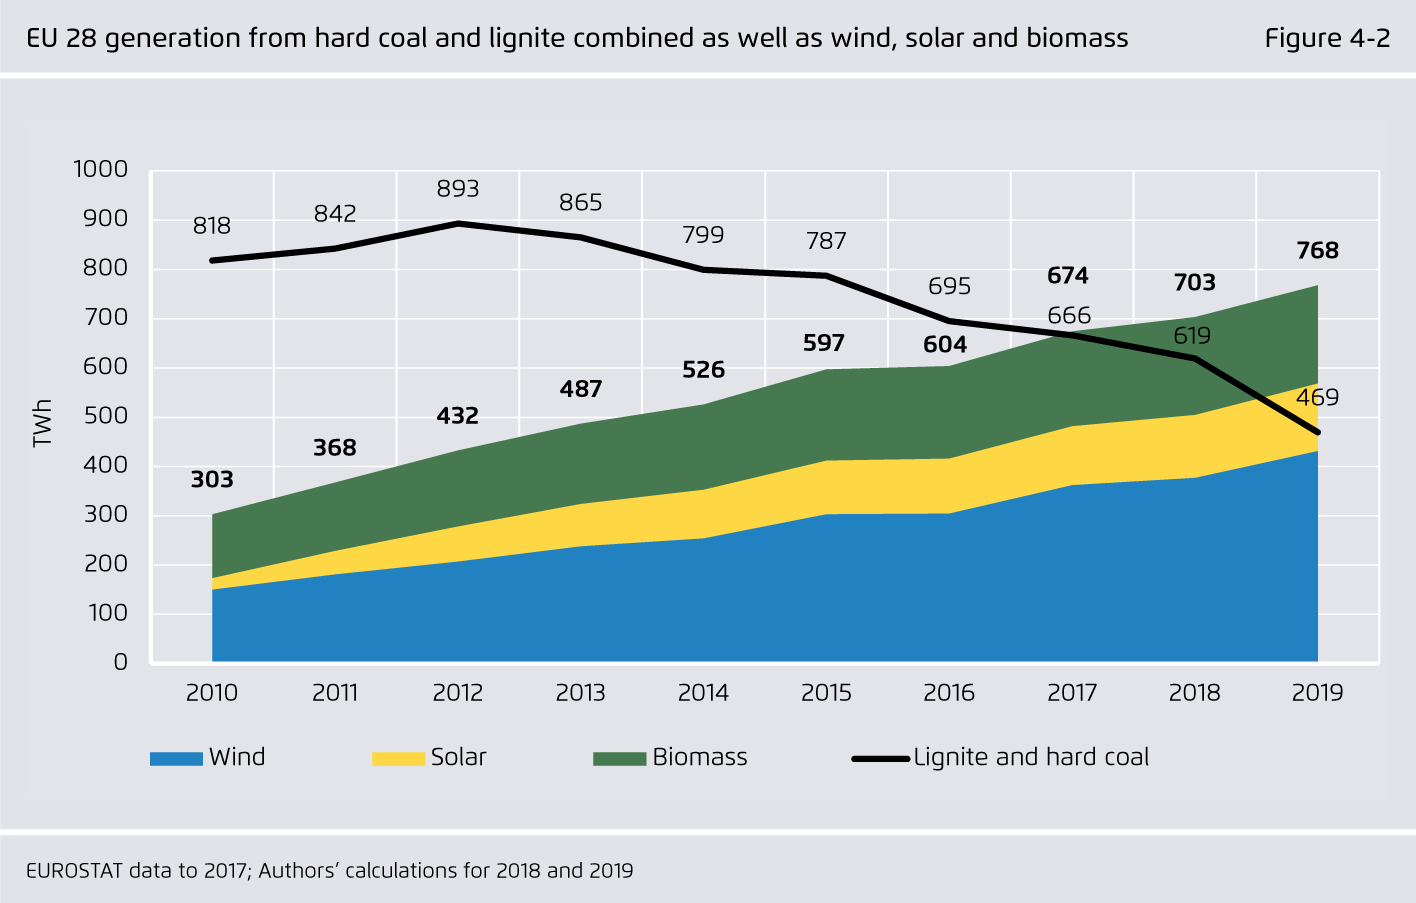 Preview for EU 28 generation from hard coal and lignite combined as well as wind, solar and biomass